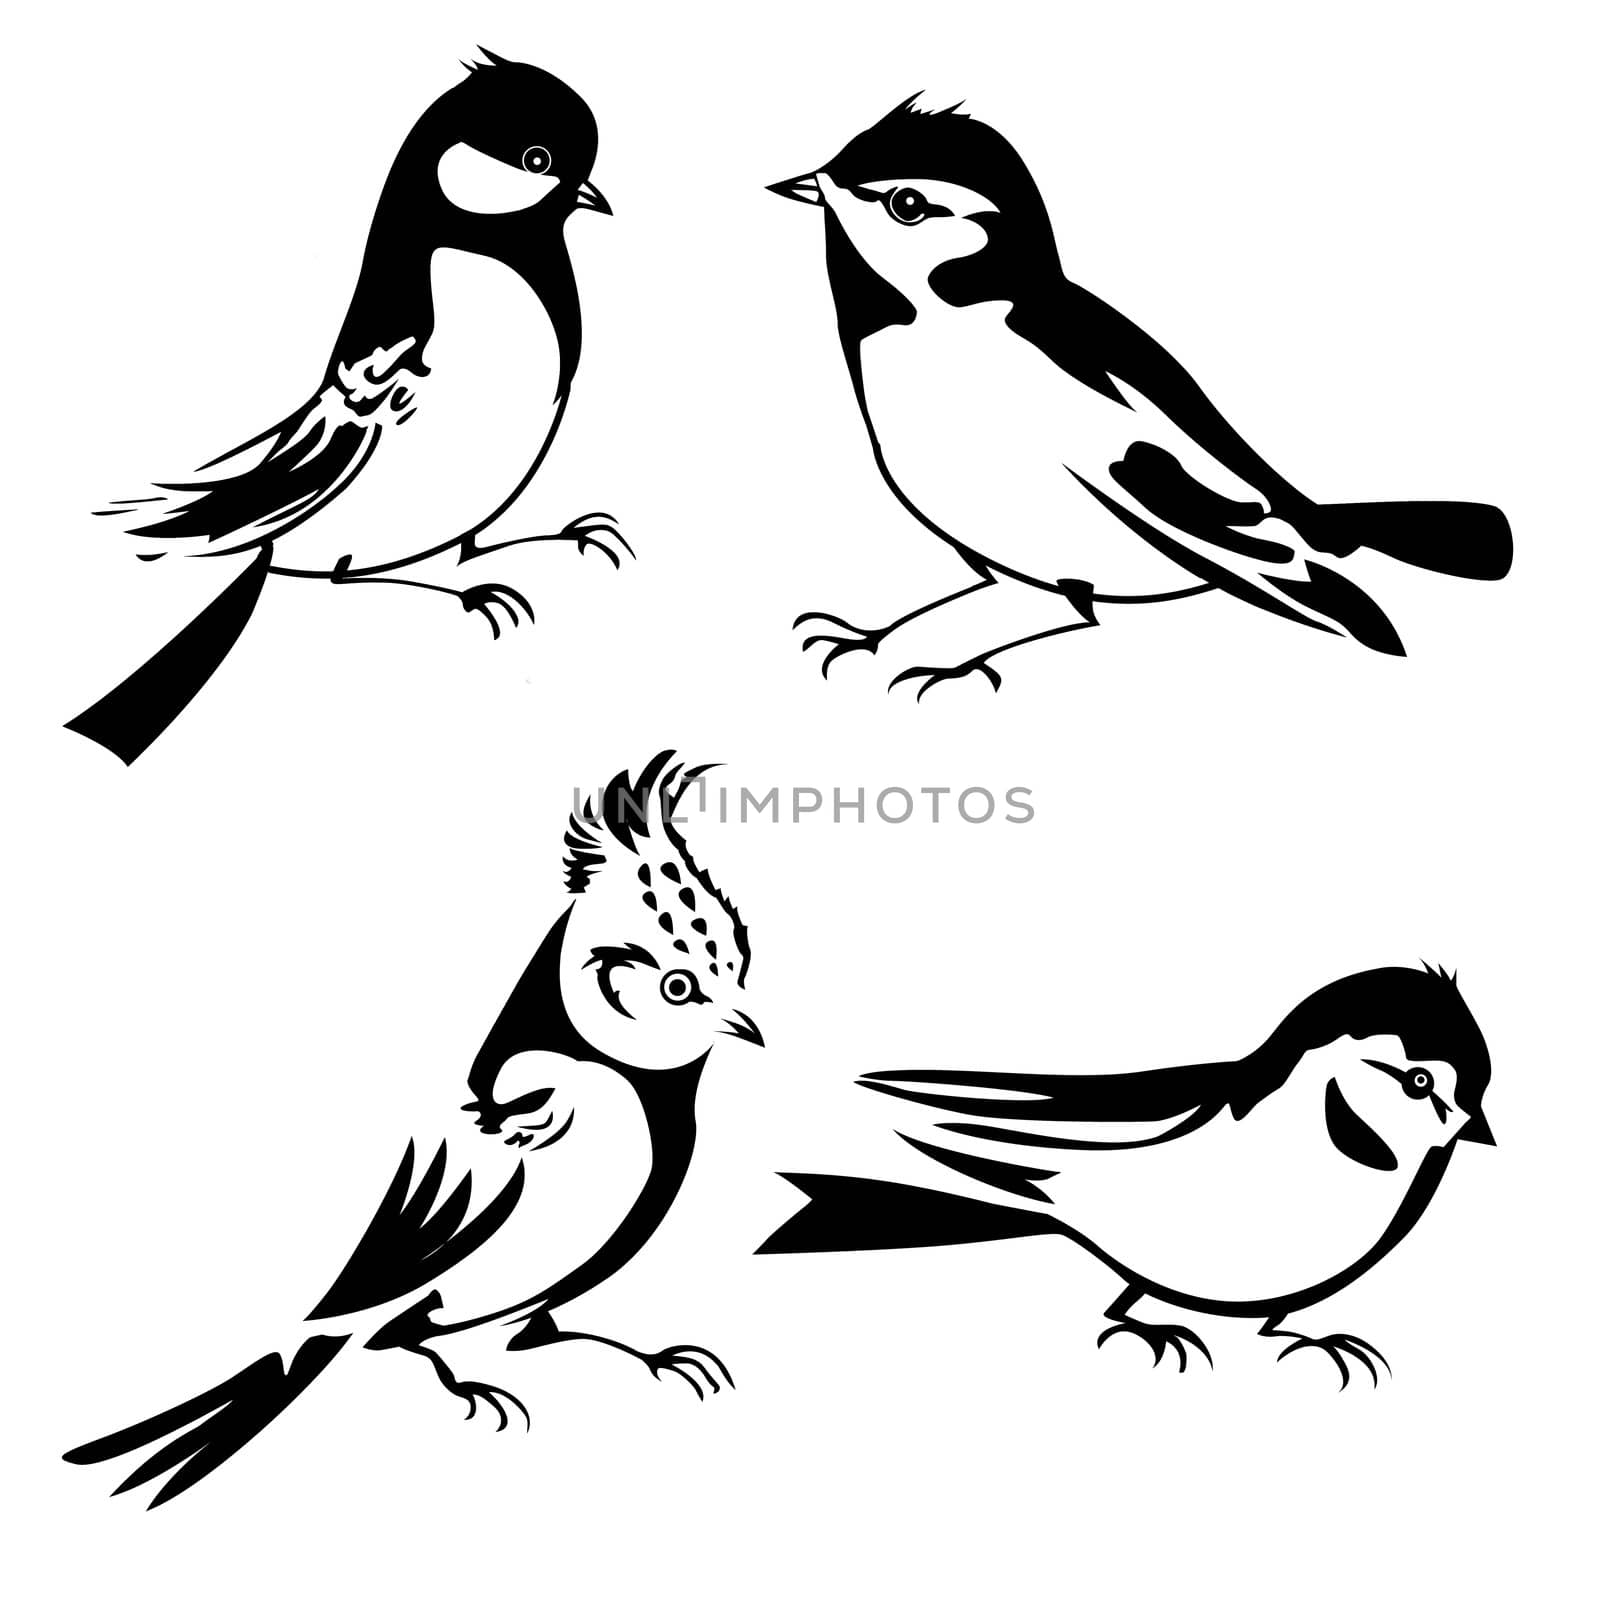 birds silhouette on white background, vector illustration by basel101658